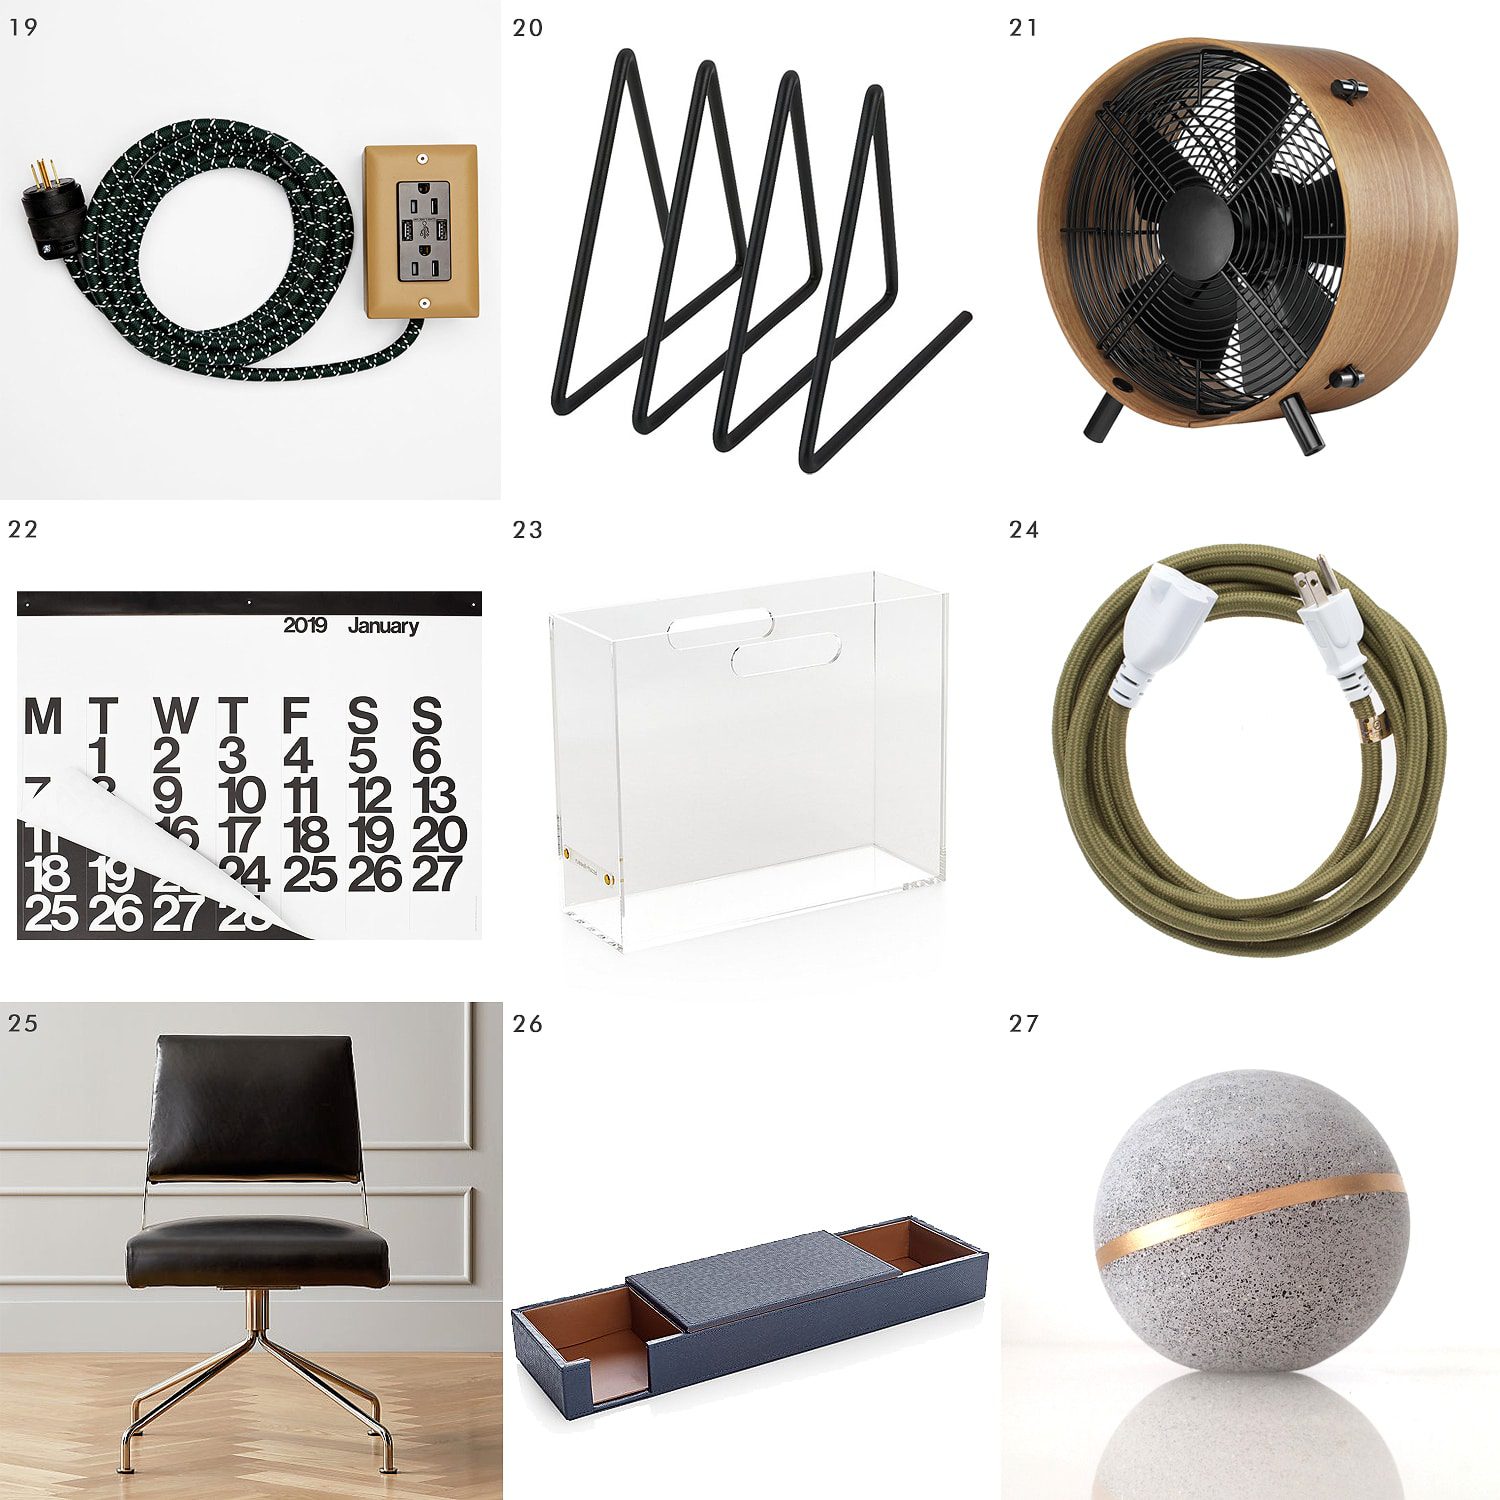 Home office essentials that look good in your home // attractive cord management, chairs, filing cabinets, mail organizers and more // via Yellow Brick Home